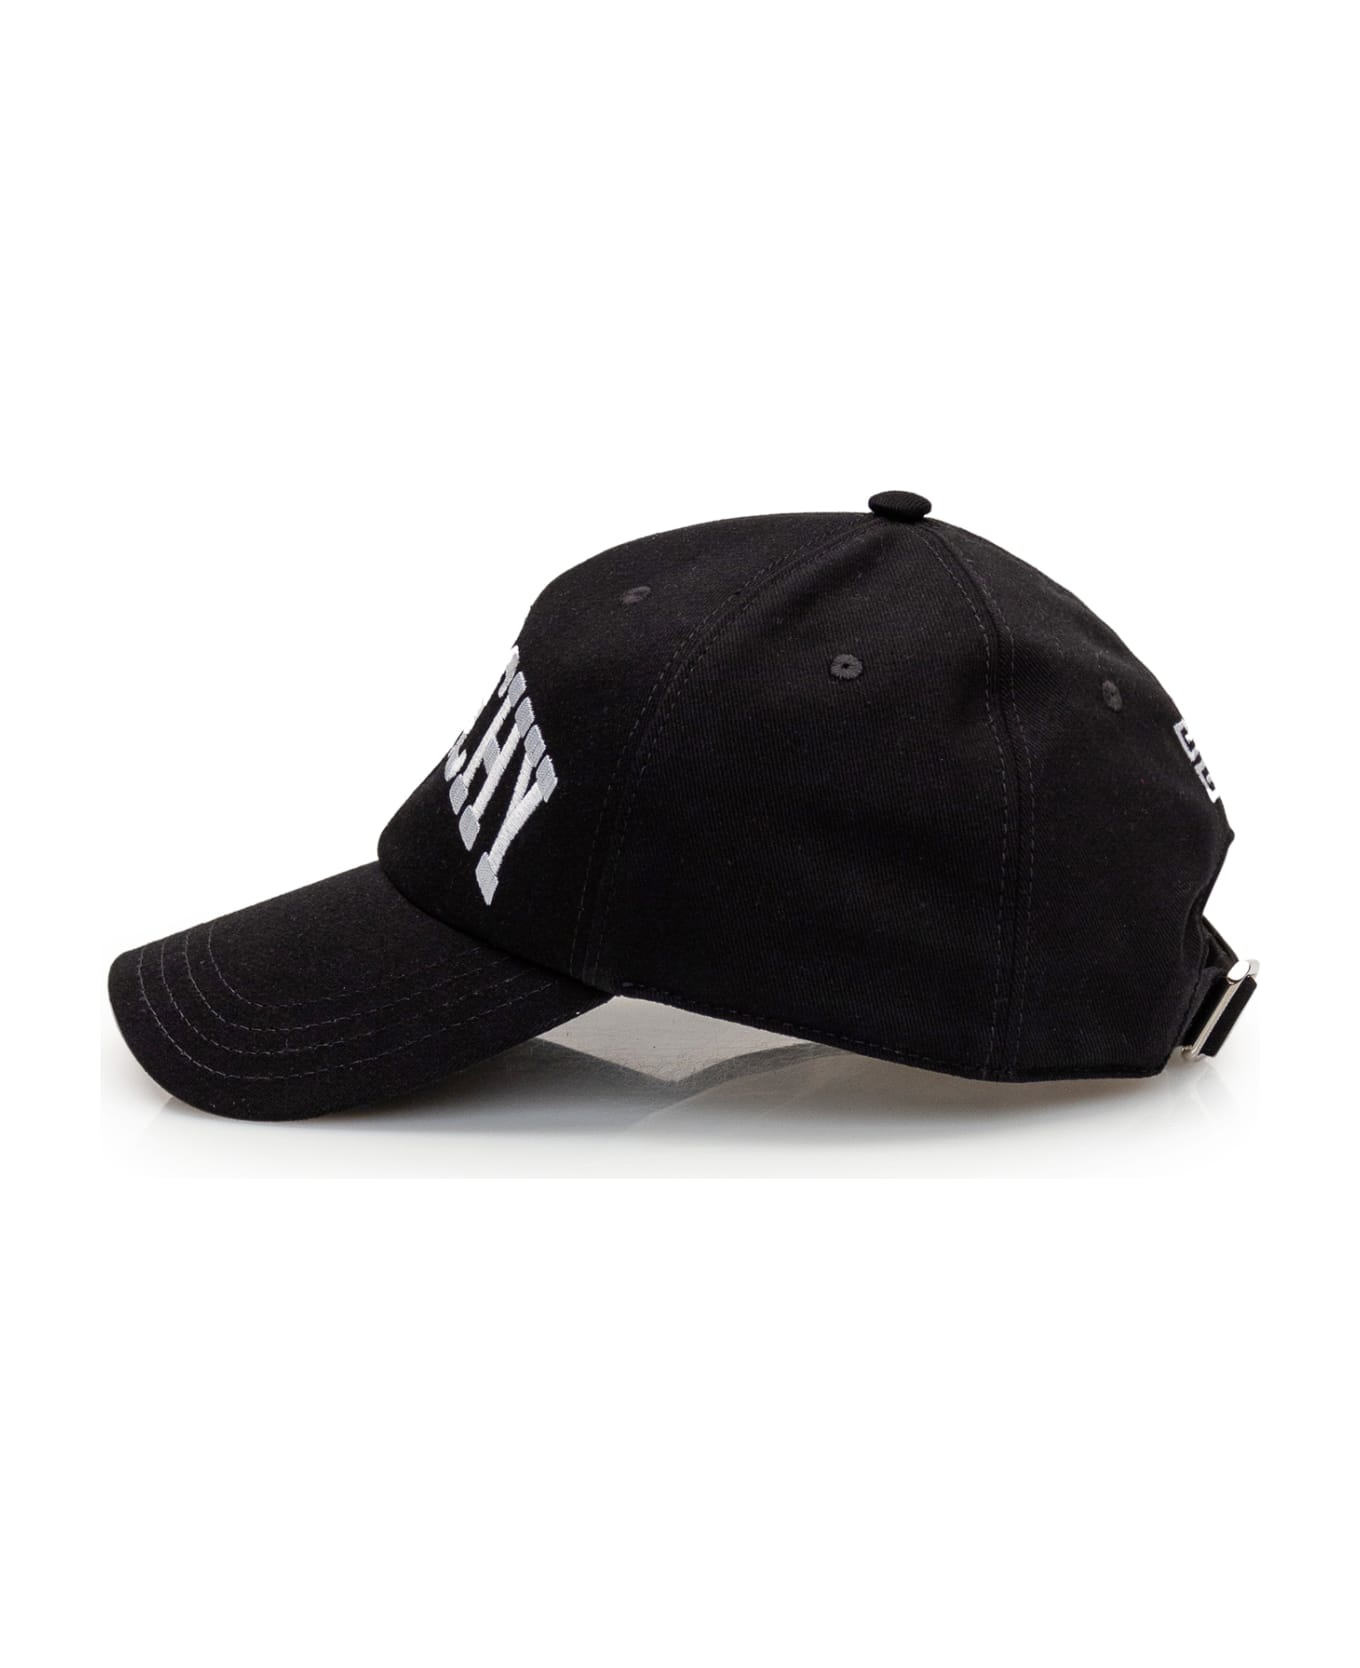 Givenchy Black Baseball Hat With Givenchy College Embroidery - Black